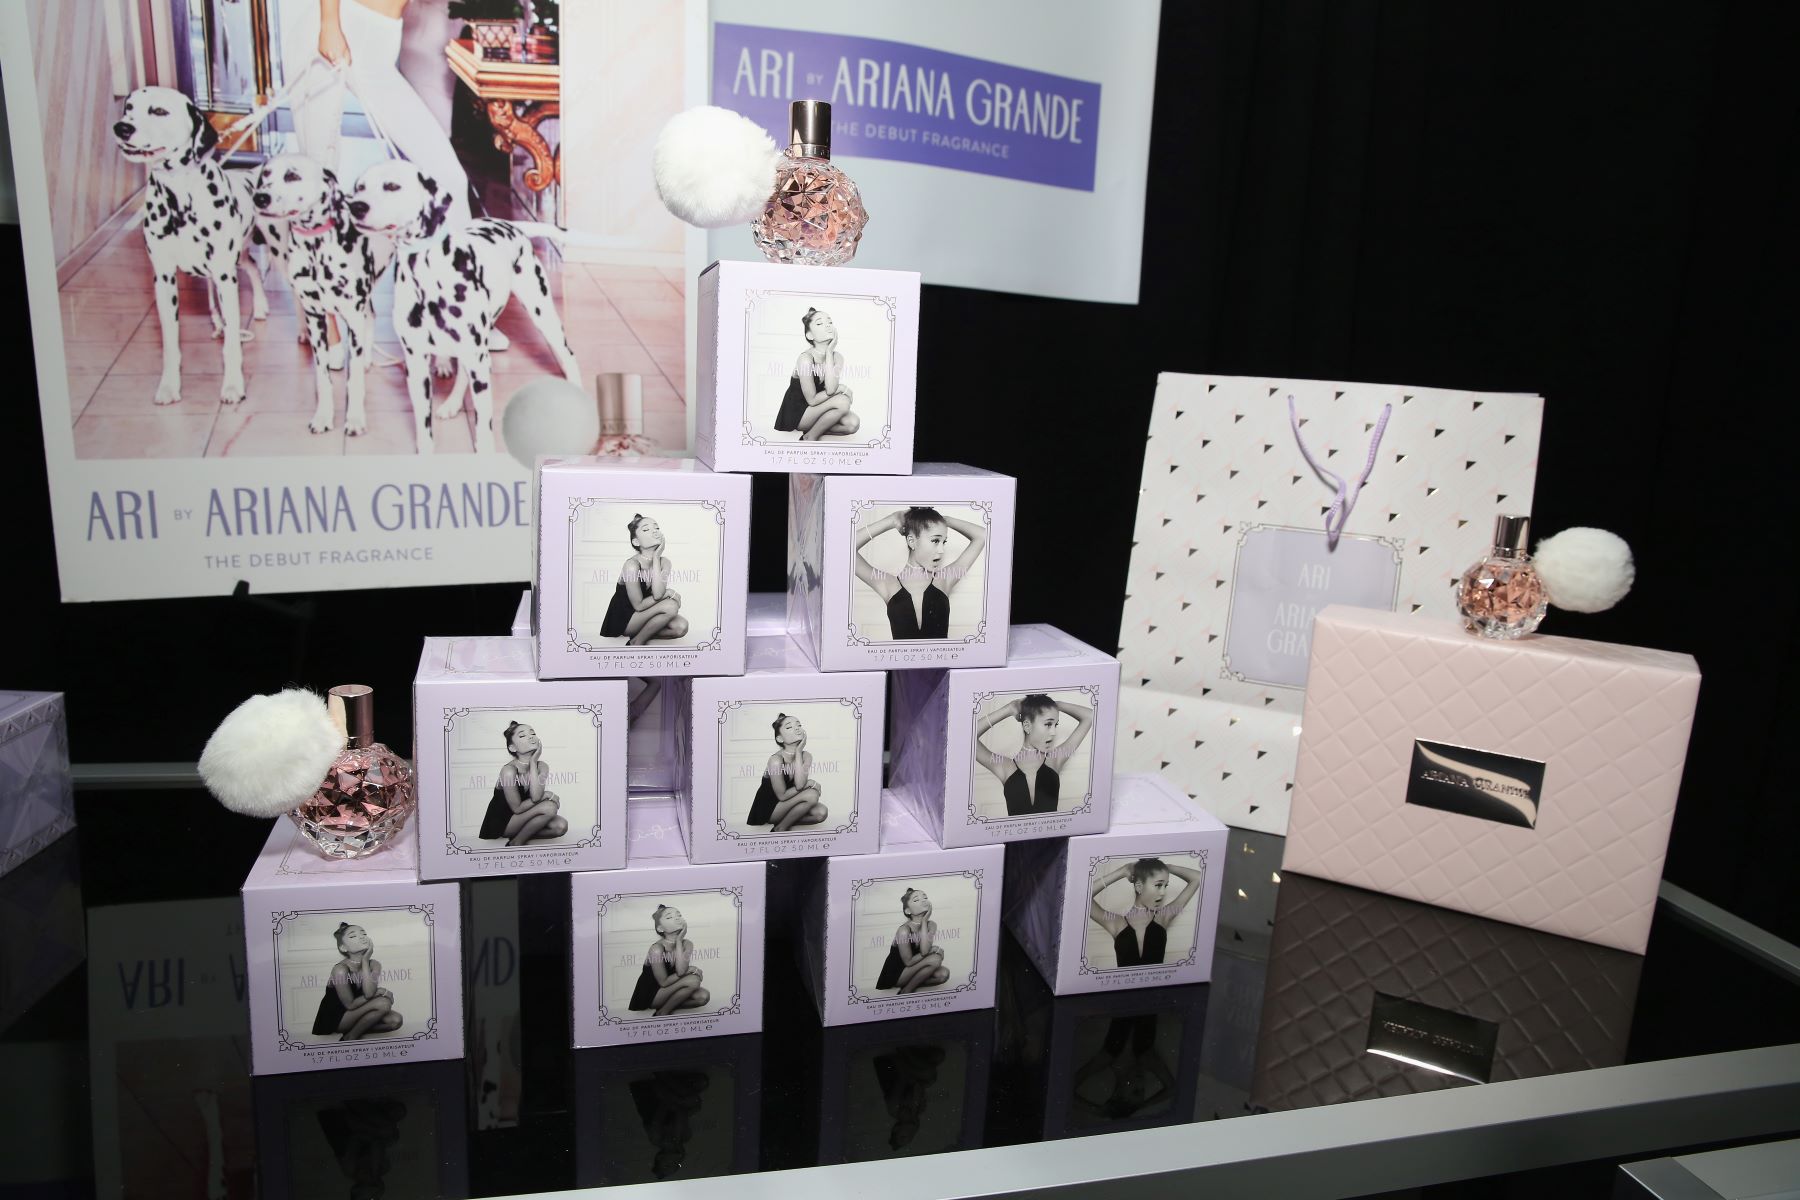 Ariana Grande's perfume and fragrances on display at Z100's Jingle Bell 2015 at Madison Square Garden